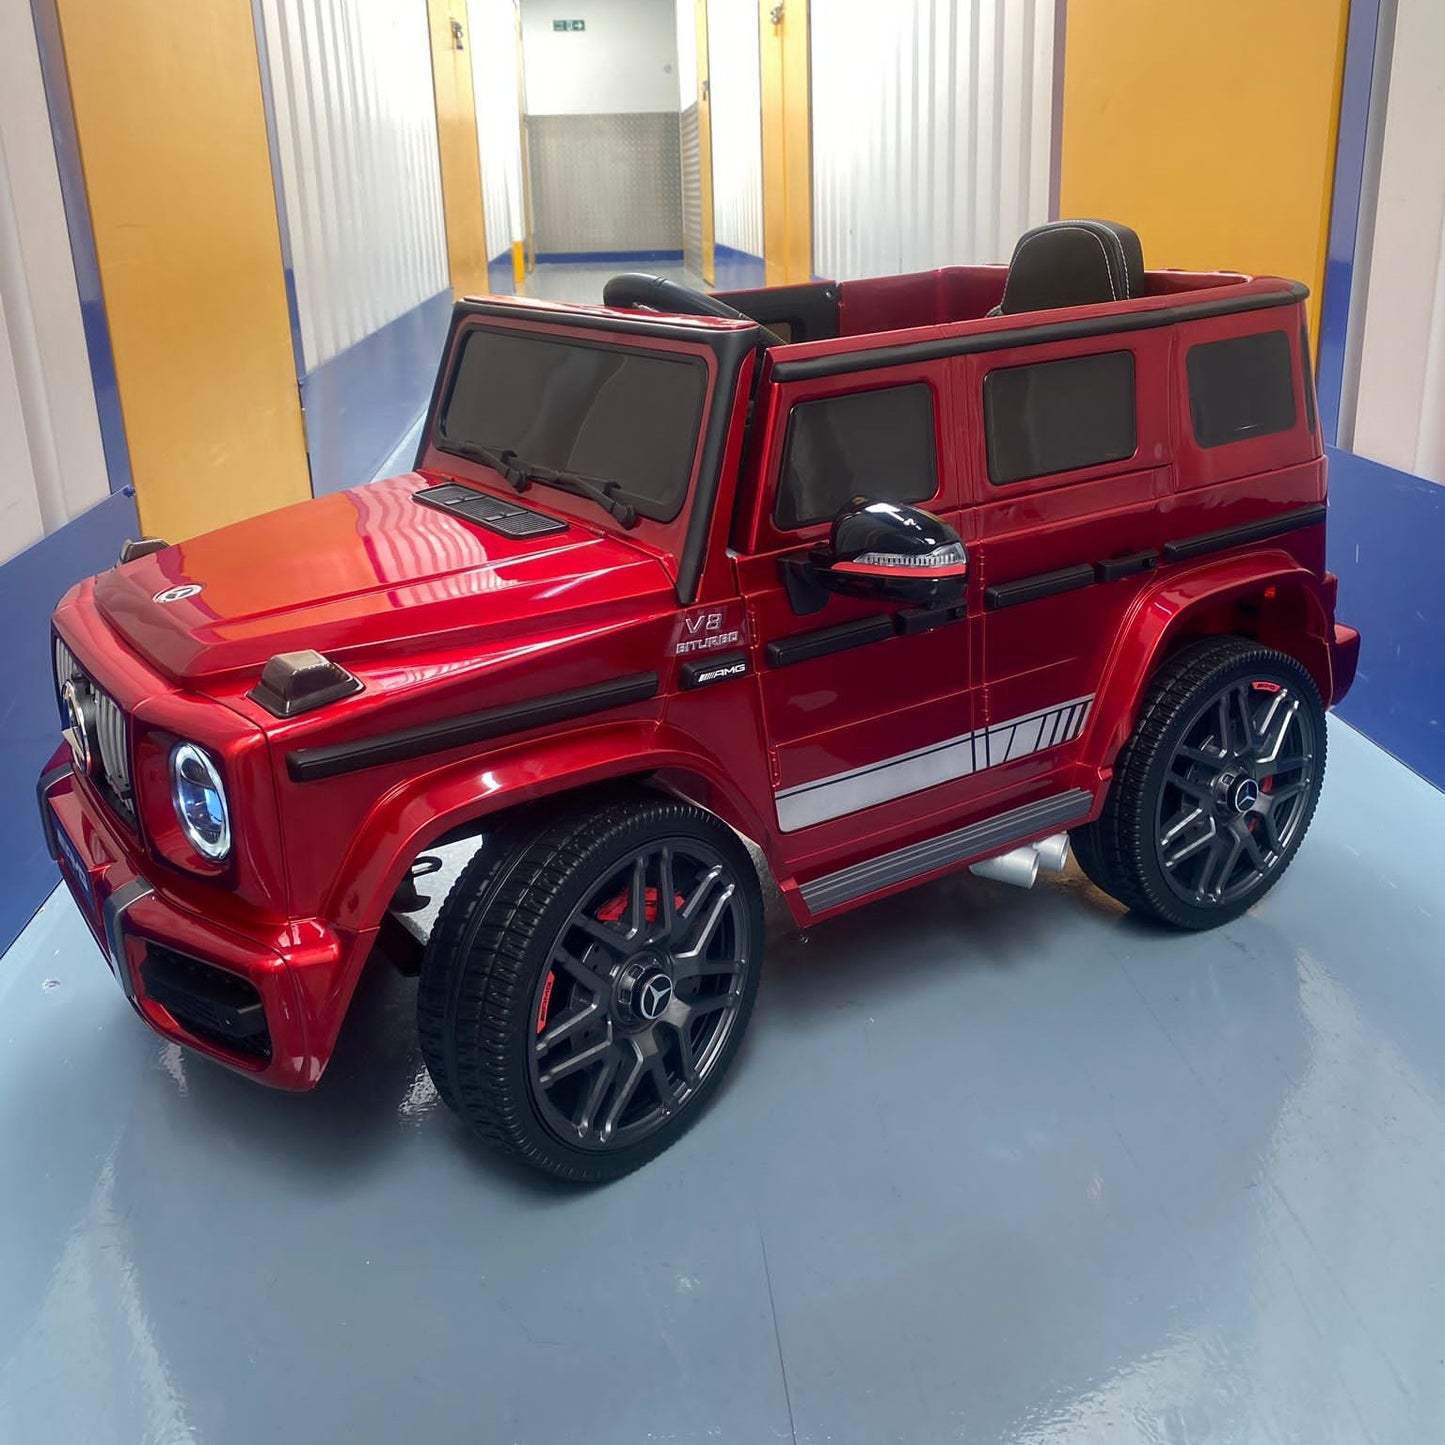 Pre-Order Mercedes G63 12v Ride on Car SUV with Remote - Metallic Red - With High Doors